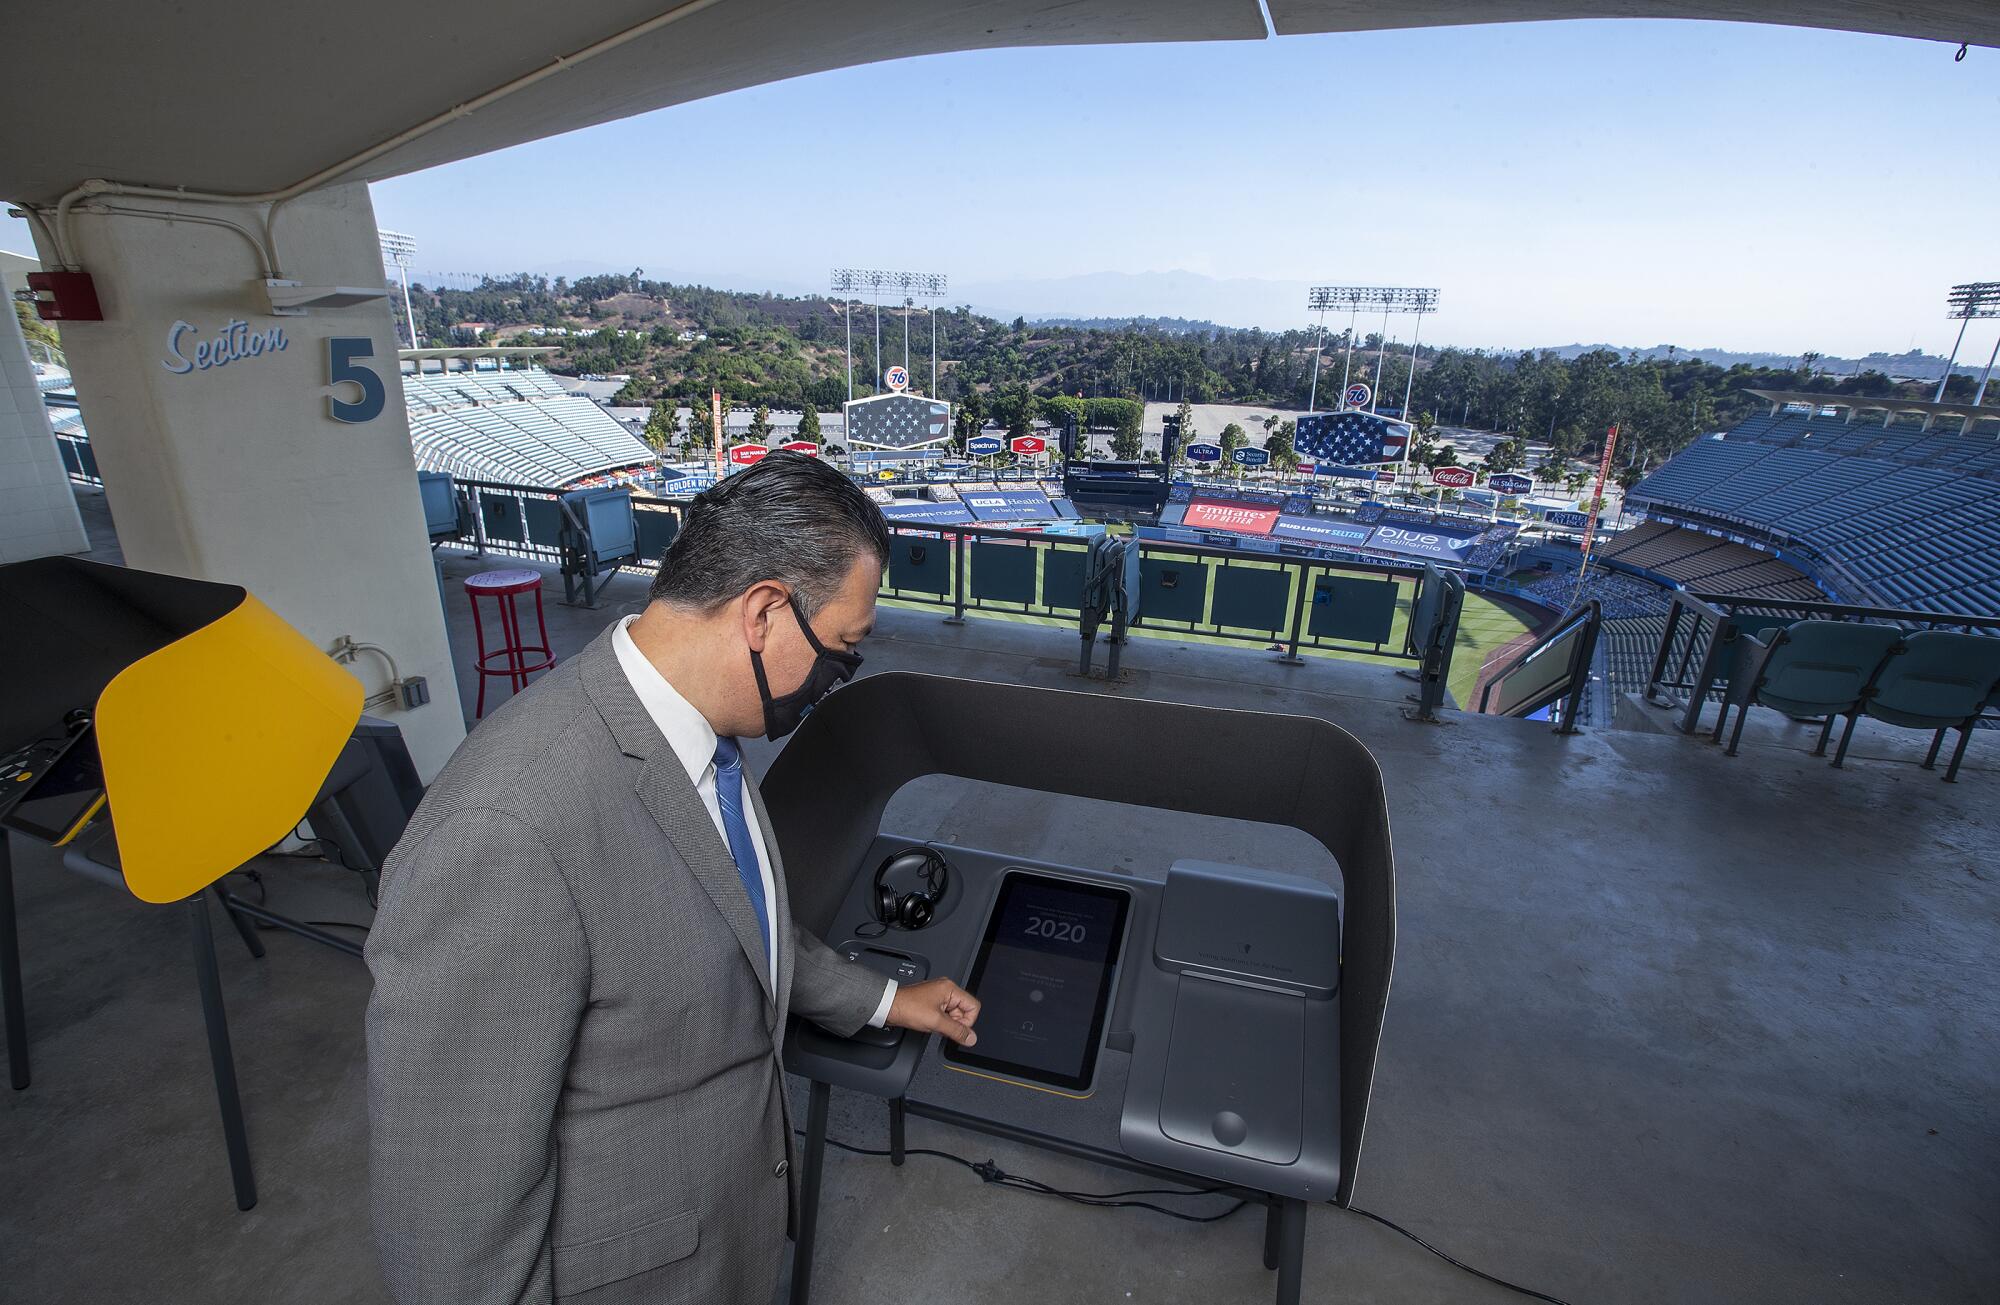 Mobile Voting Center to Be Held at Dodger Stadium – NBC Los Angeles